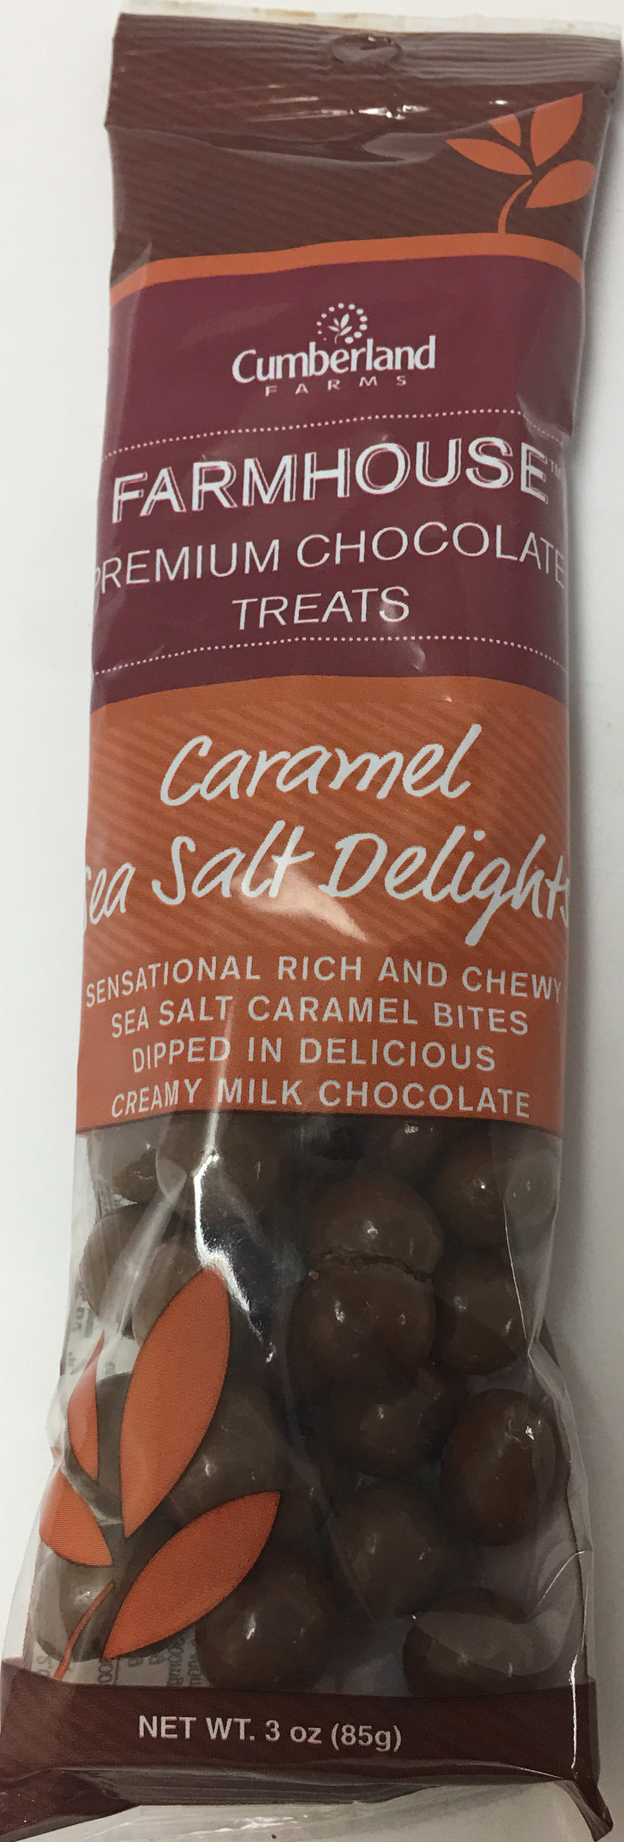 Cumberland Farms Announces Voluntary Recall of its Sea Salt Caramel Delights Flavor of Cumberland Farms Premium Chocolate Treats Due to Possible Presence of Peanuts